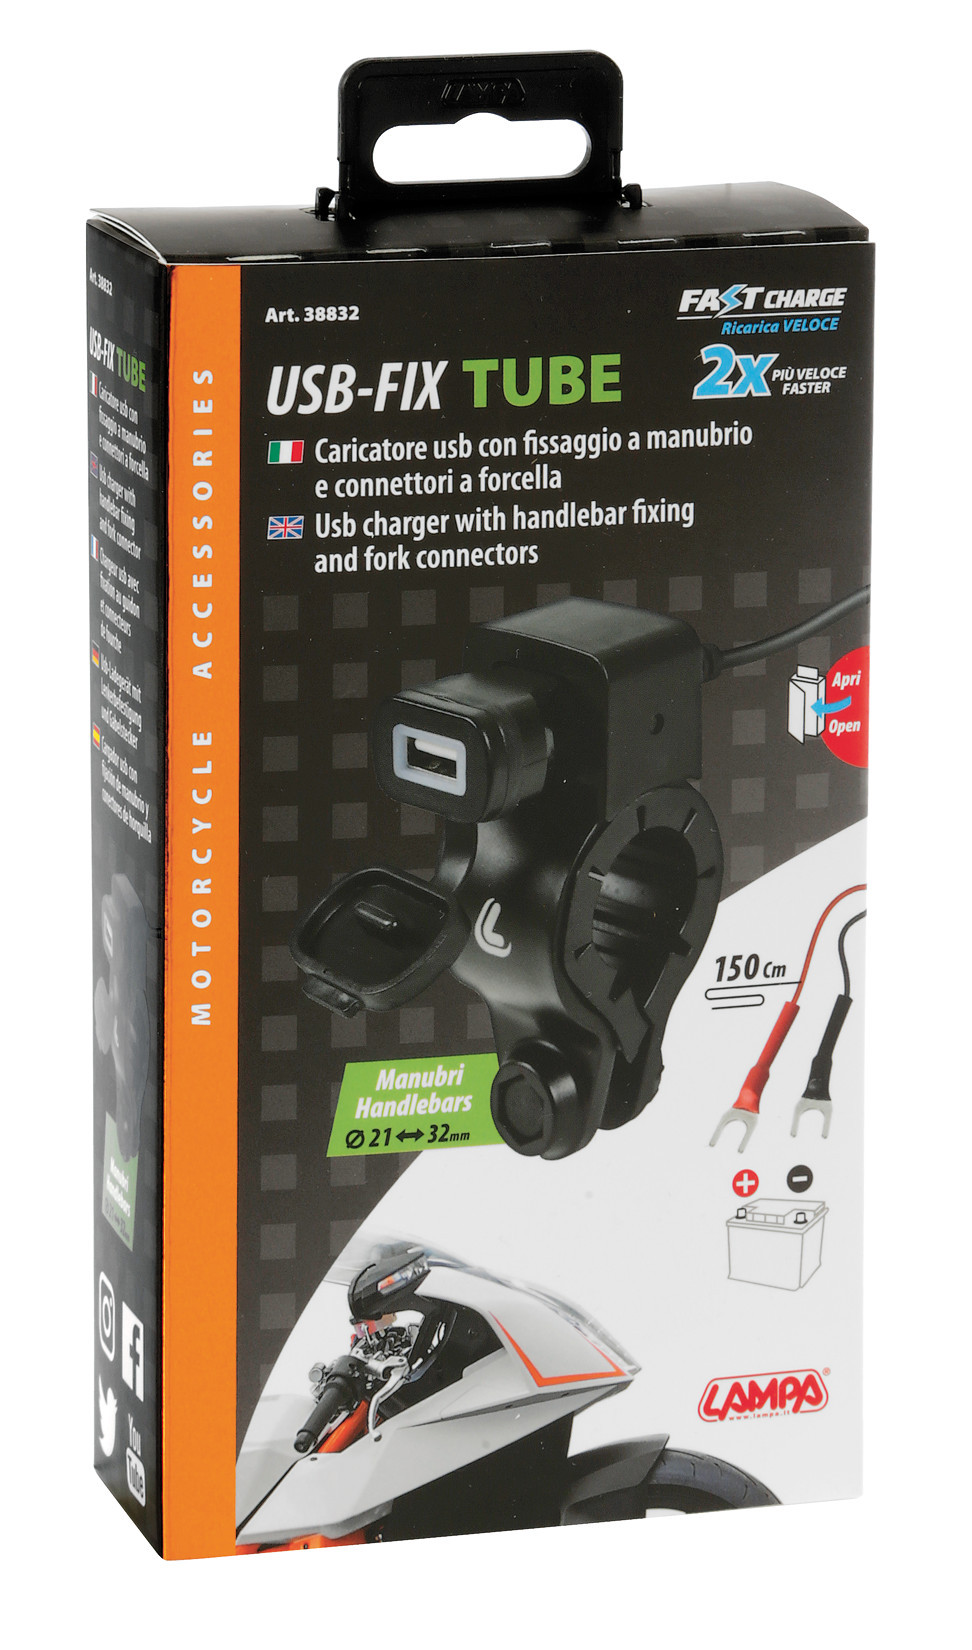 Usb-Fix Tube, Usb charger with handlebar fixing and fork connectors - Fast Charge - 3000 mA - 12/24V thumb